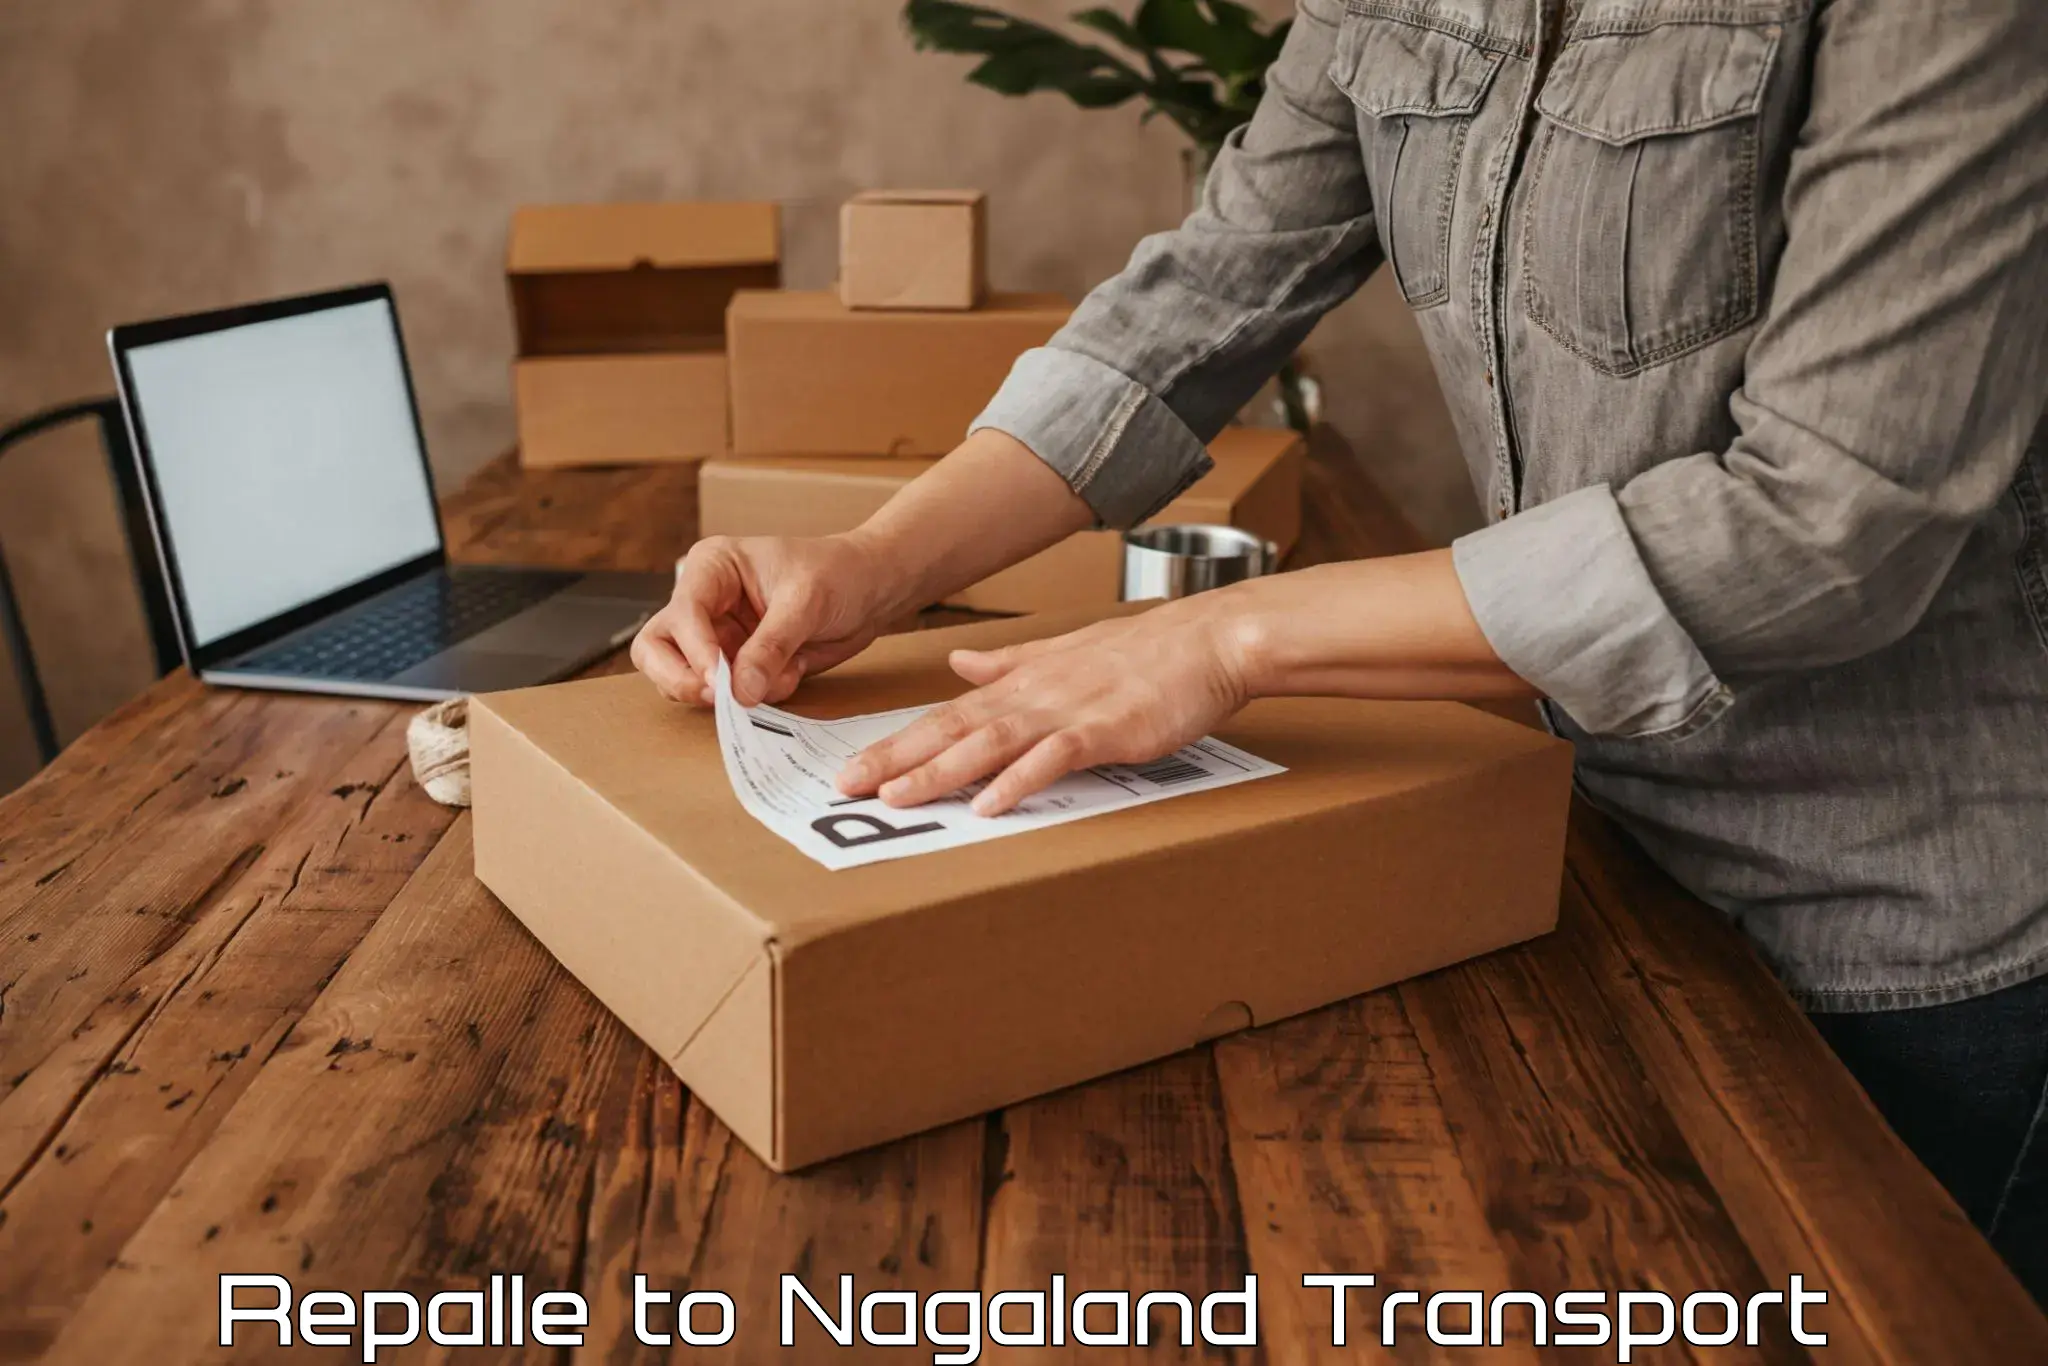 Air cargo transport services Repalle to Nagaland